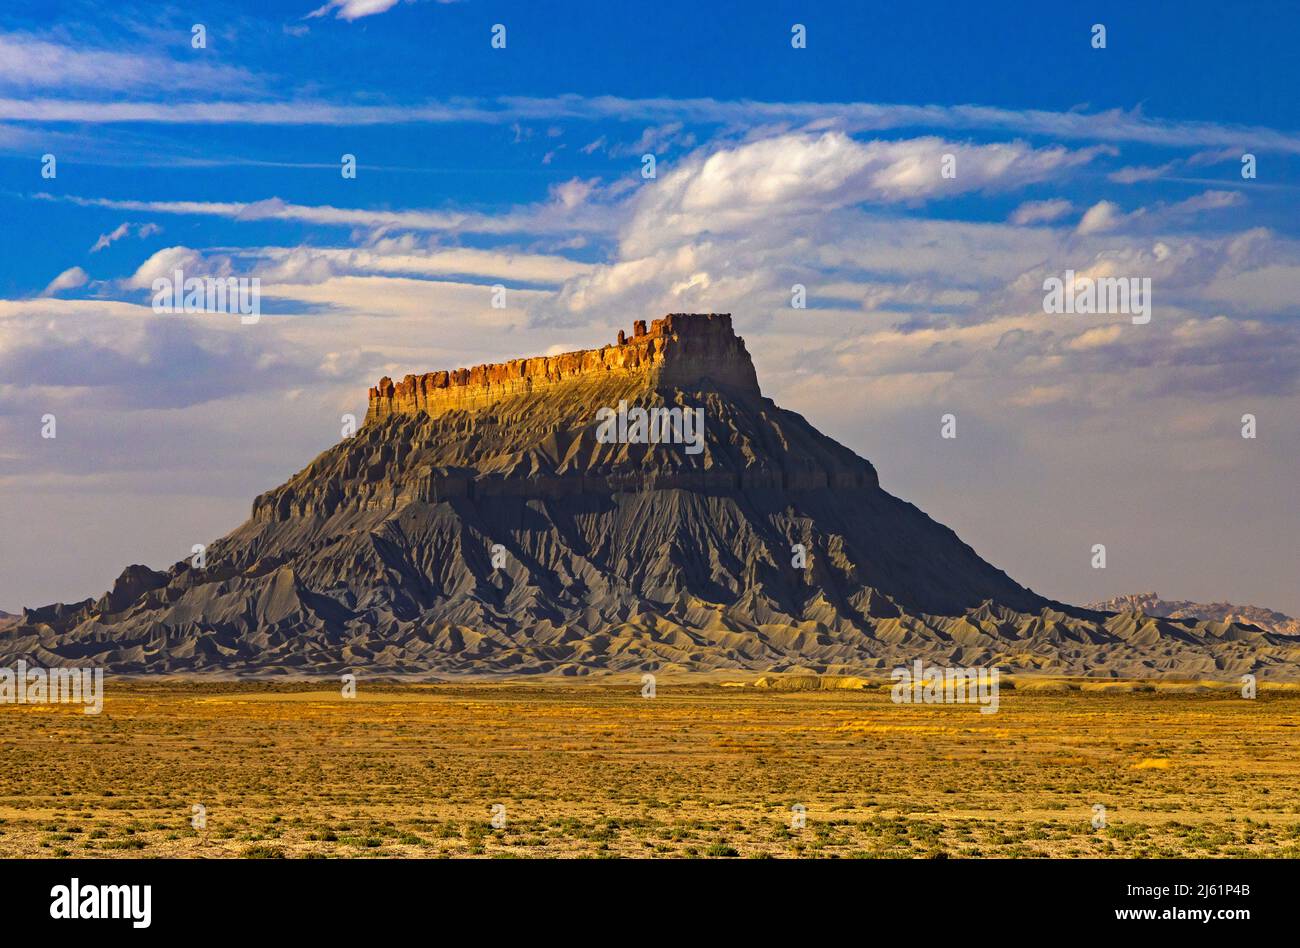 This is a late-afternoon view of a landmark formation called Factory Butte in an isolated area of Wayne County Utah, USA. Stock Photo